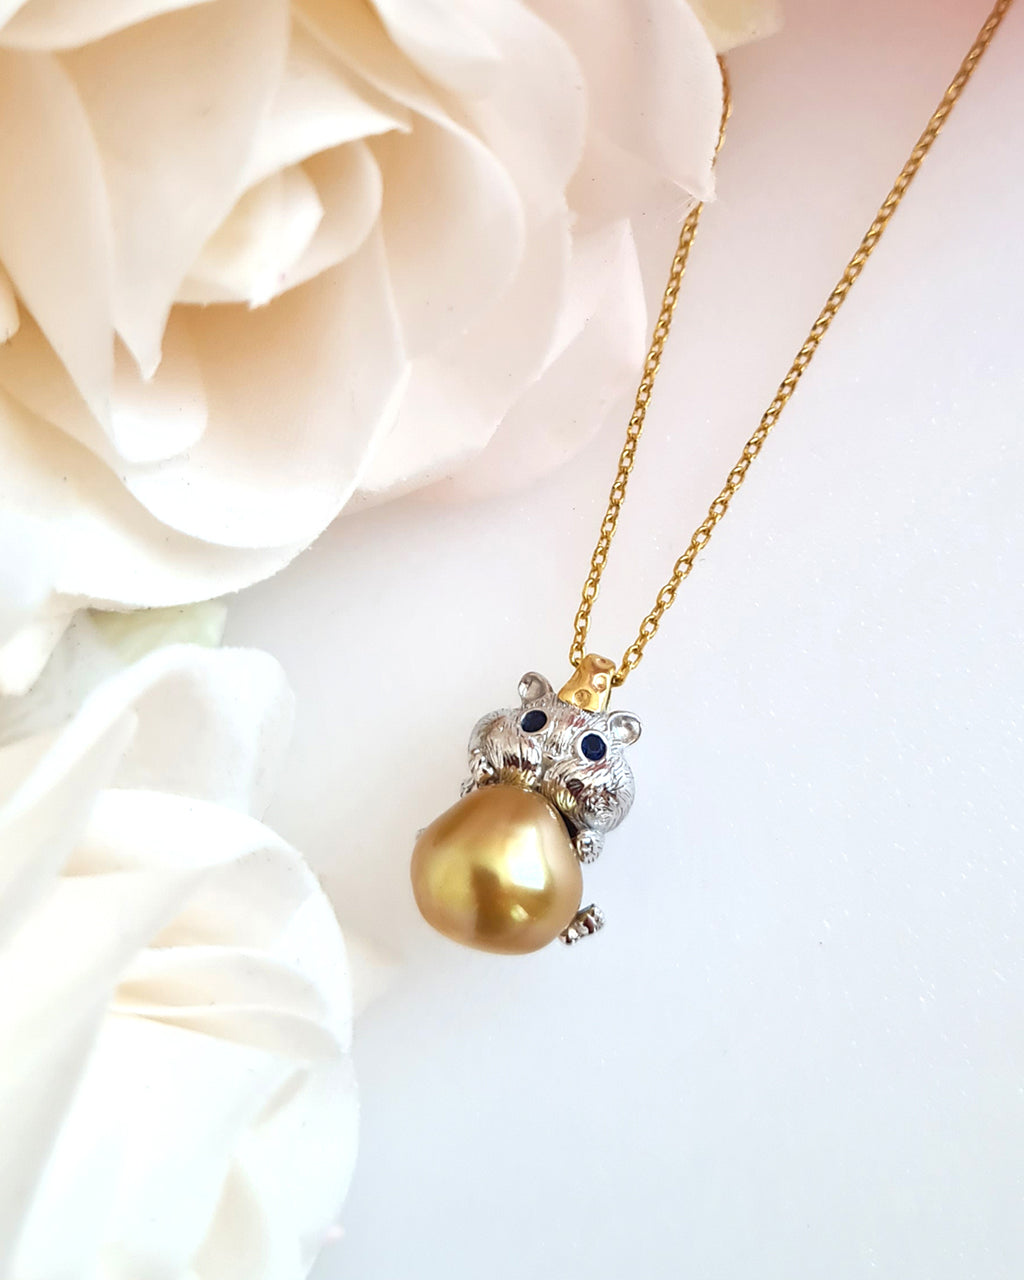 Cute Hamster Pendant Necklace with South Sea Pearl | Modern Everyday Pearl Jewelry